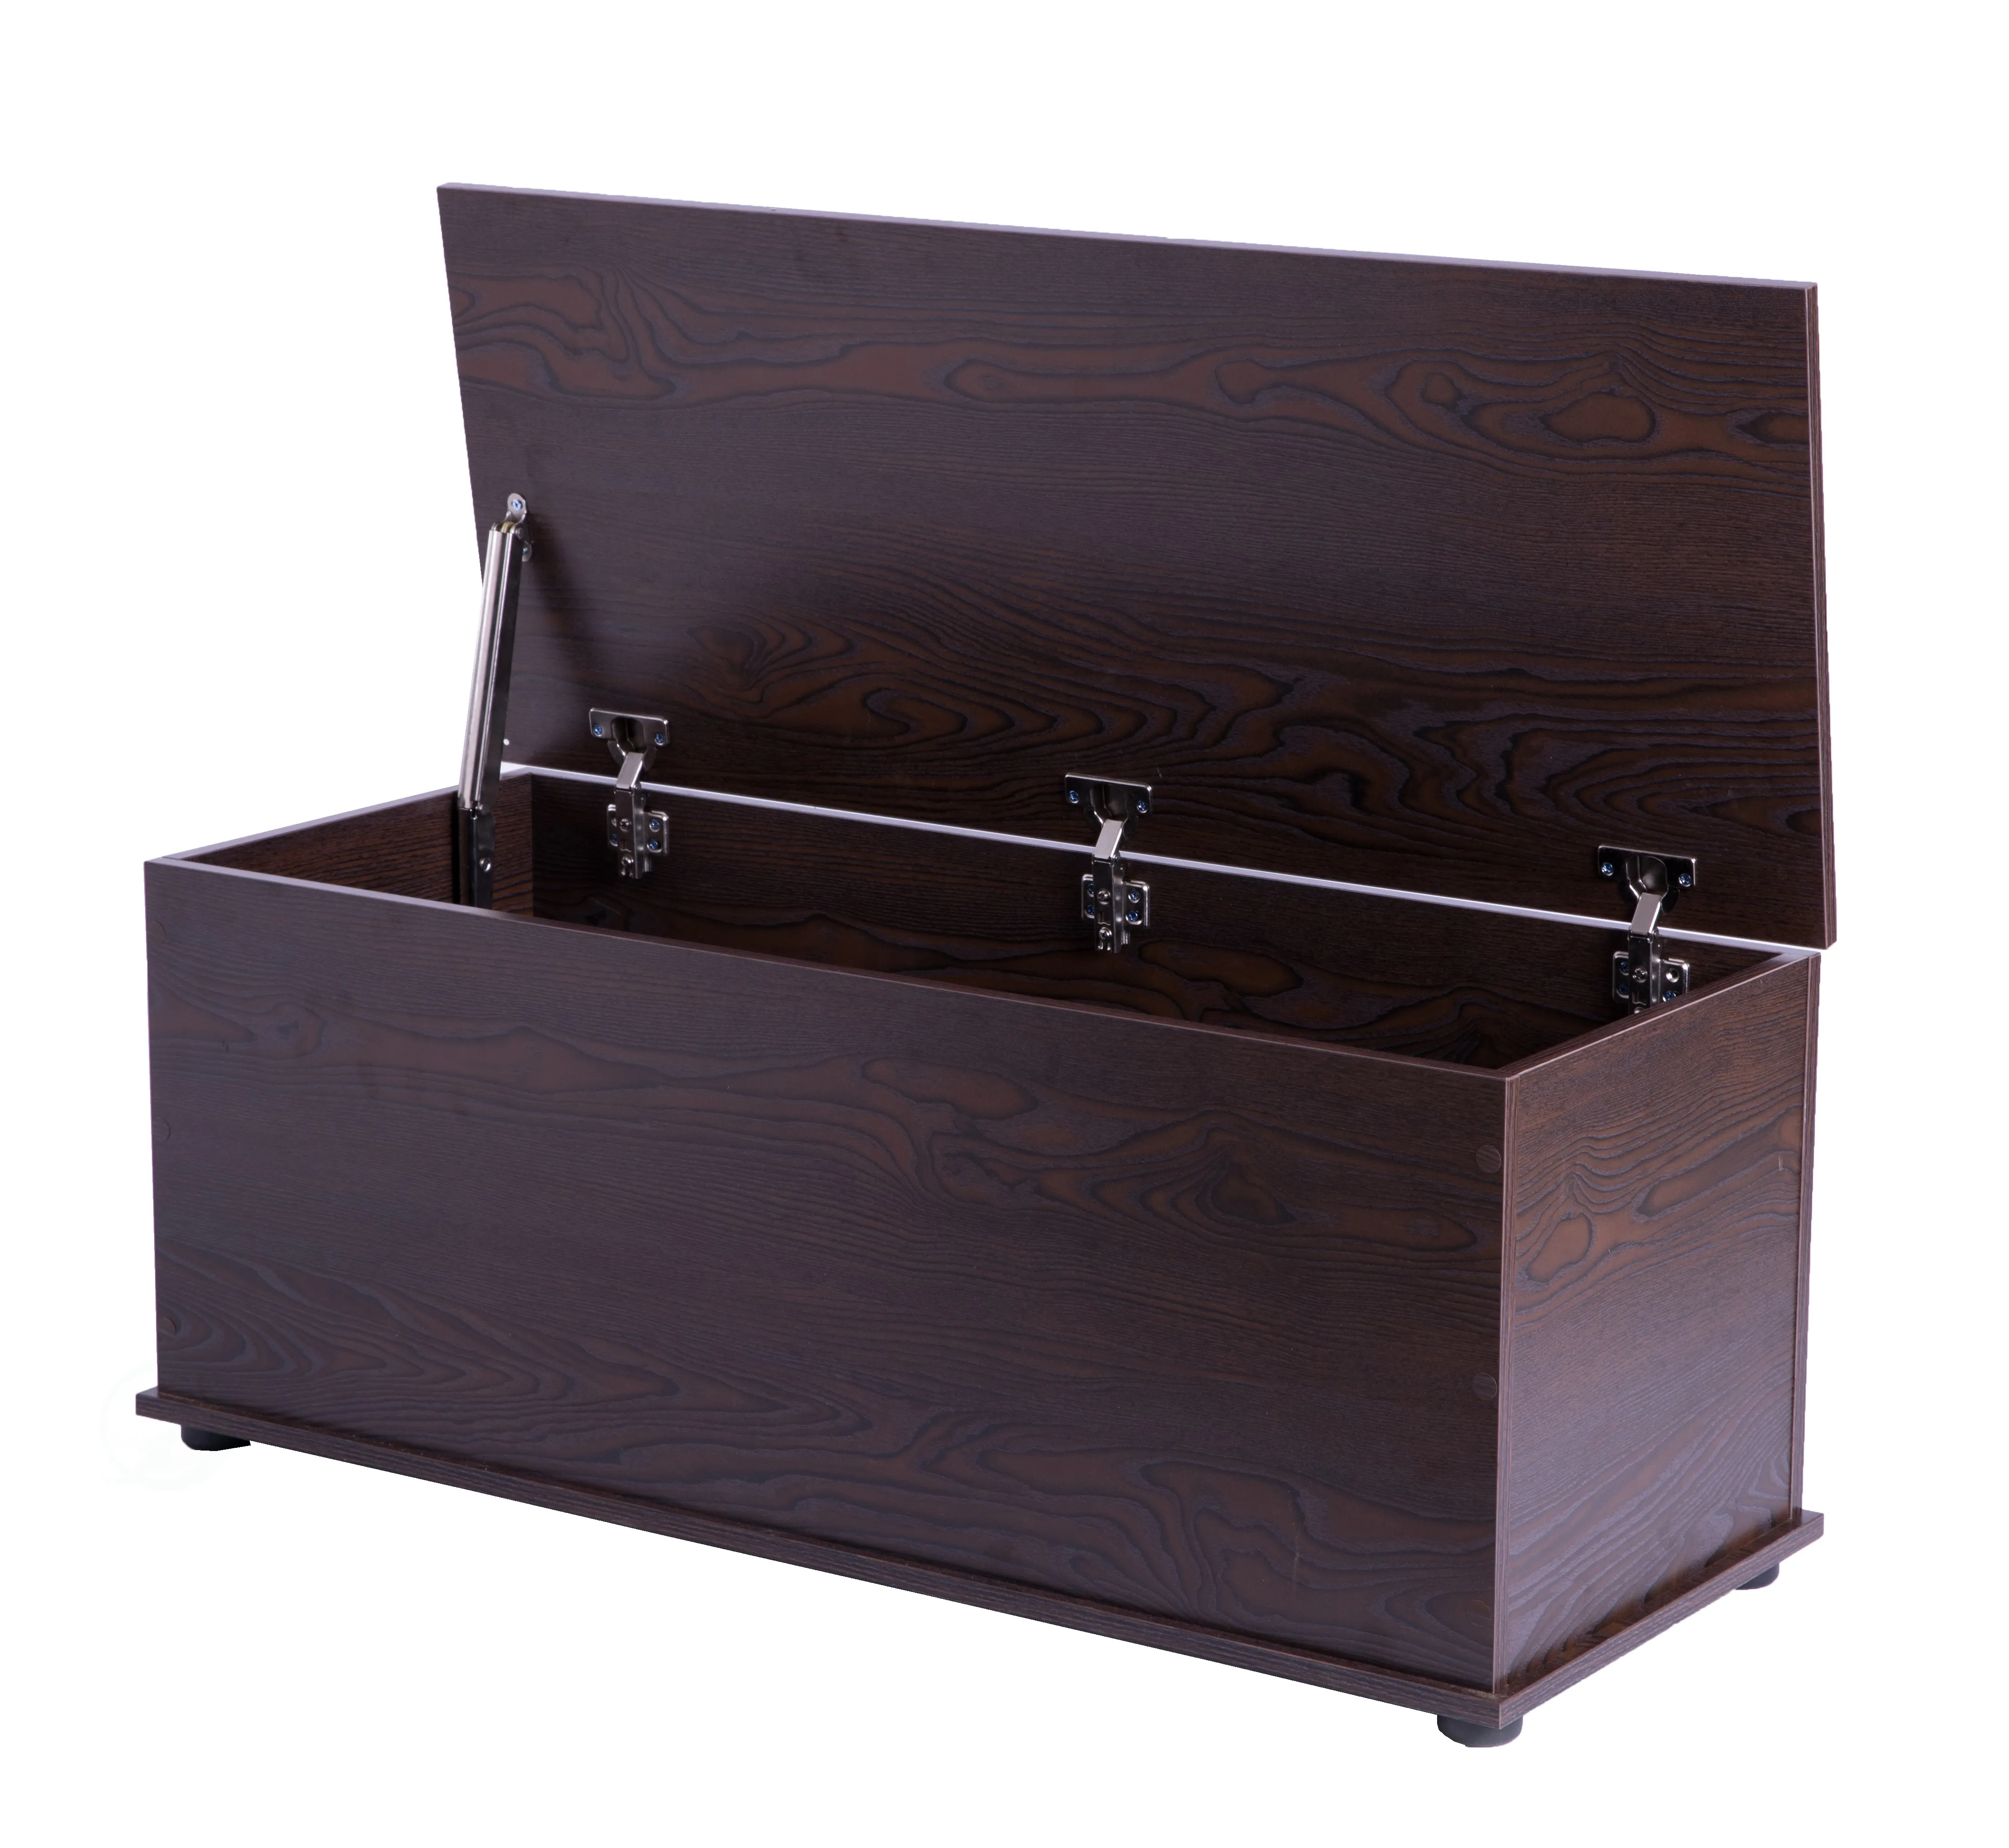 Large Storage Toy Box with Soft Closure Lid, Wooden Organizing Furniture Storage Chest, Brown